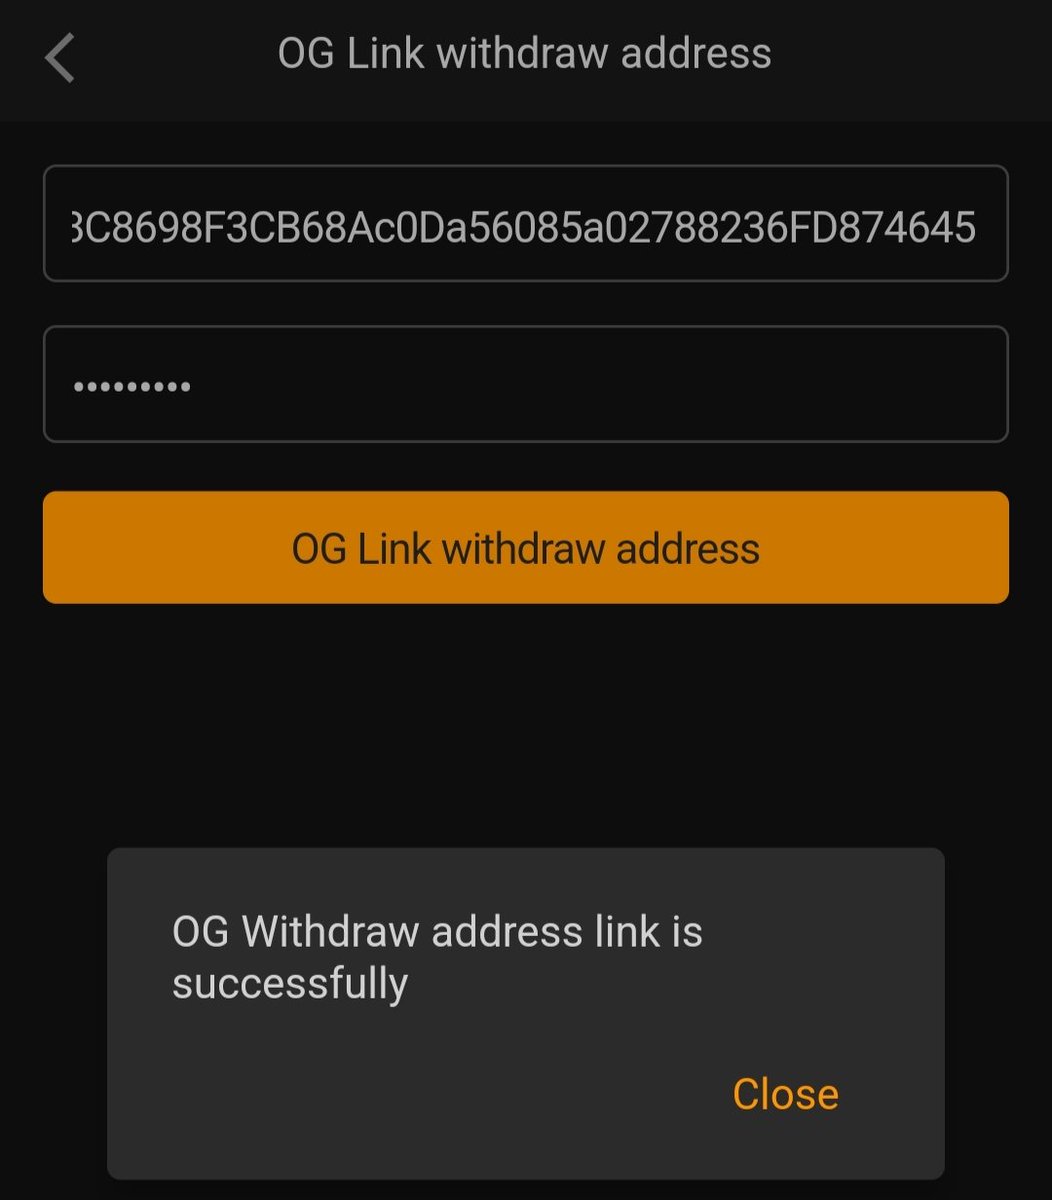 Have you linked your wallet address on satoshi app successfully? Yes or No

🎉🎉🎉🎉🎉🎉🎉🎉🎉🎉🎉🎉🎉🎉🎉

OG Listing Soon🔥🔥🔥🔥🔥🔥🔥🔥

Follow Us 👉 @BigDott_Satoshi

Like ❤️  |  Repost  🔄  |  Comment 🖍️

#OpenEX #iceNetwork #BNB #Airdrop #SatoshiAPP #cryptocurrency #CORE